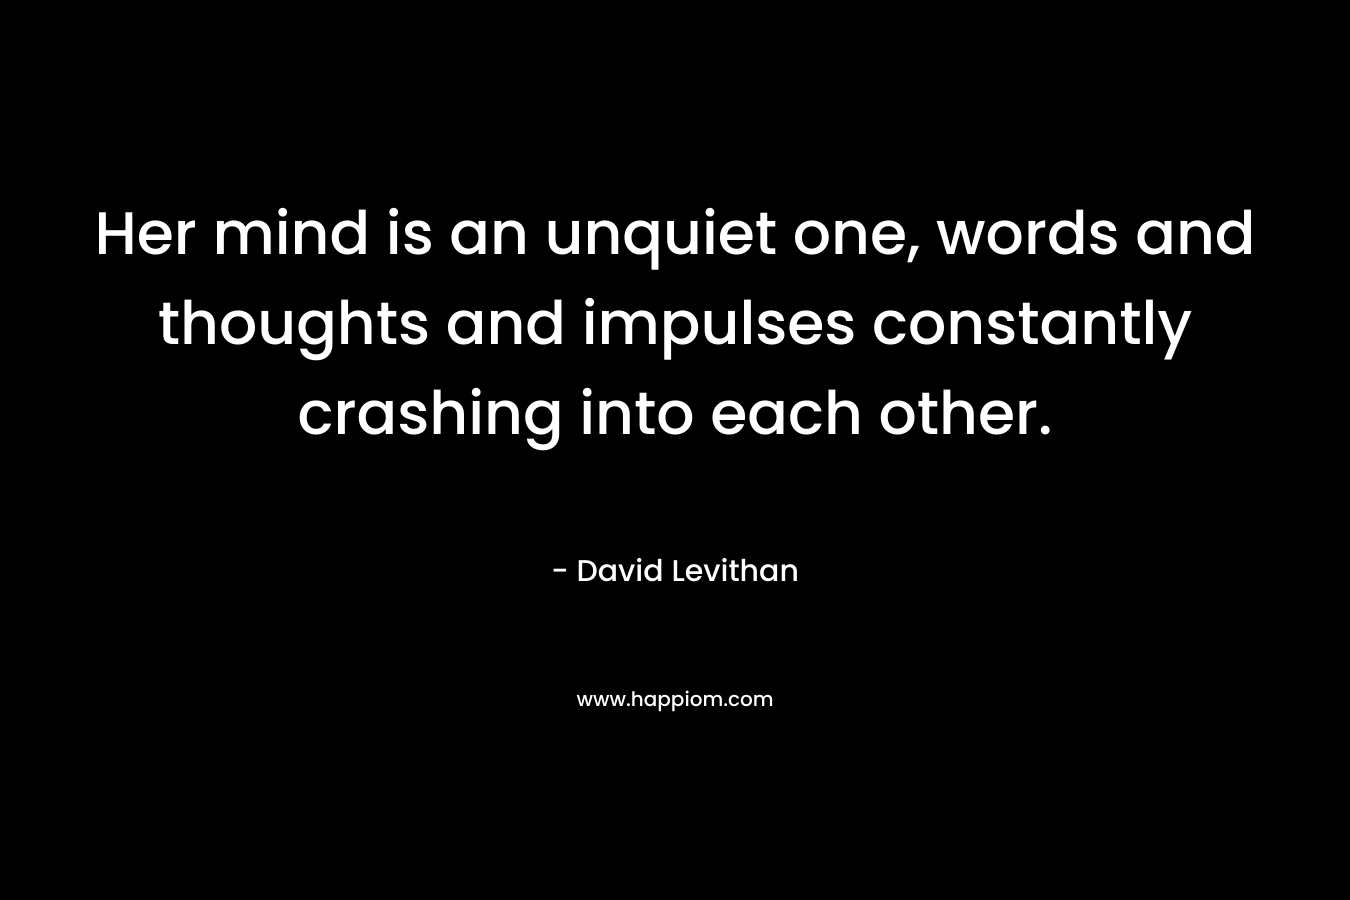 Her mind is an unquiet one, words and thoughts and impulses constantly crashing into each other. – David Levithan